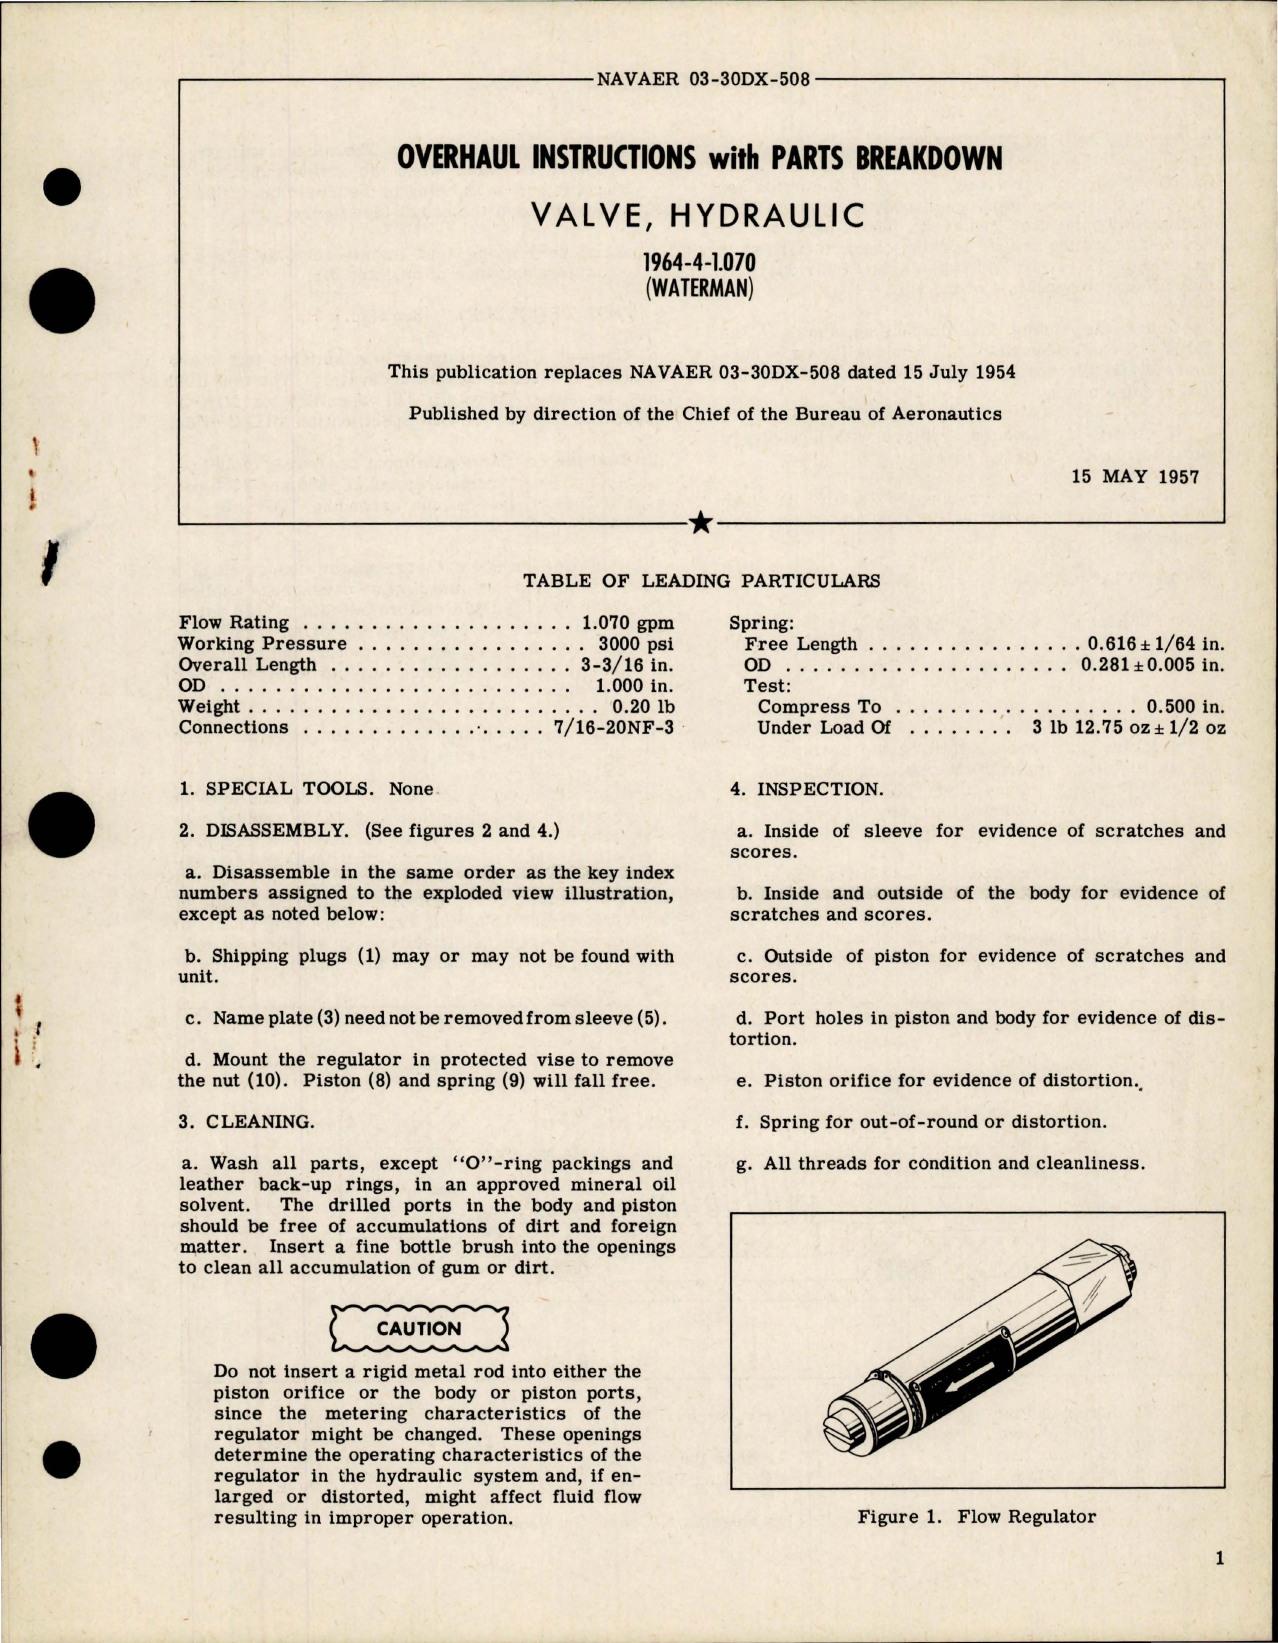 Sample page 1 from AirCorps Library document: Overhaul Instructions with Parts Breakdown for Hydraulic Valve - 1964-4-1.070 